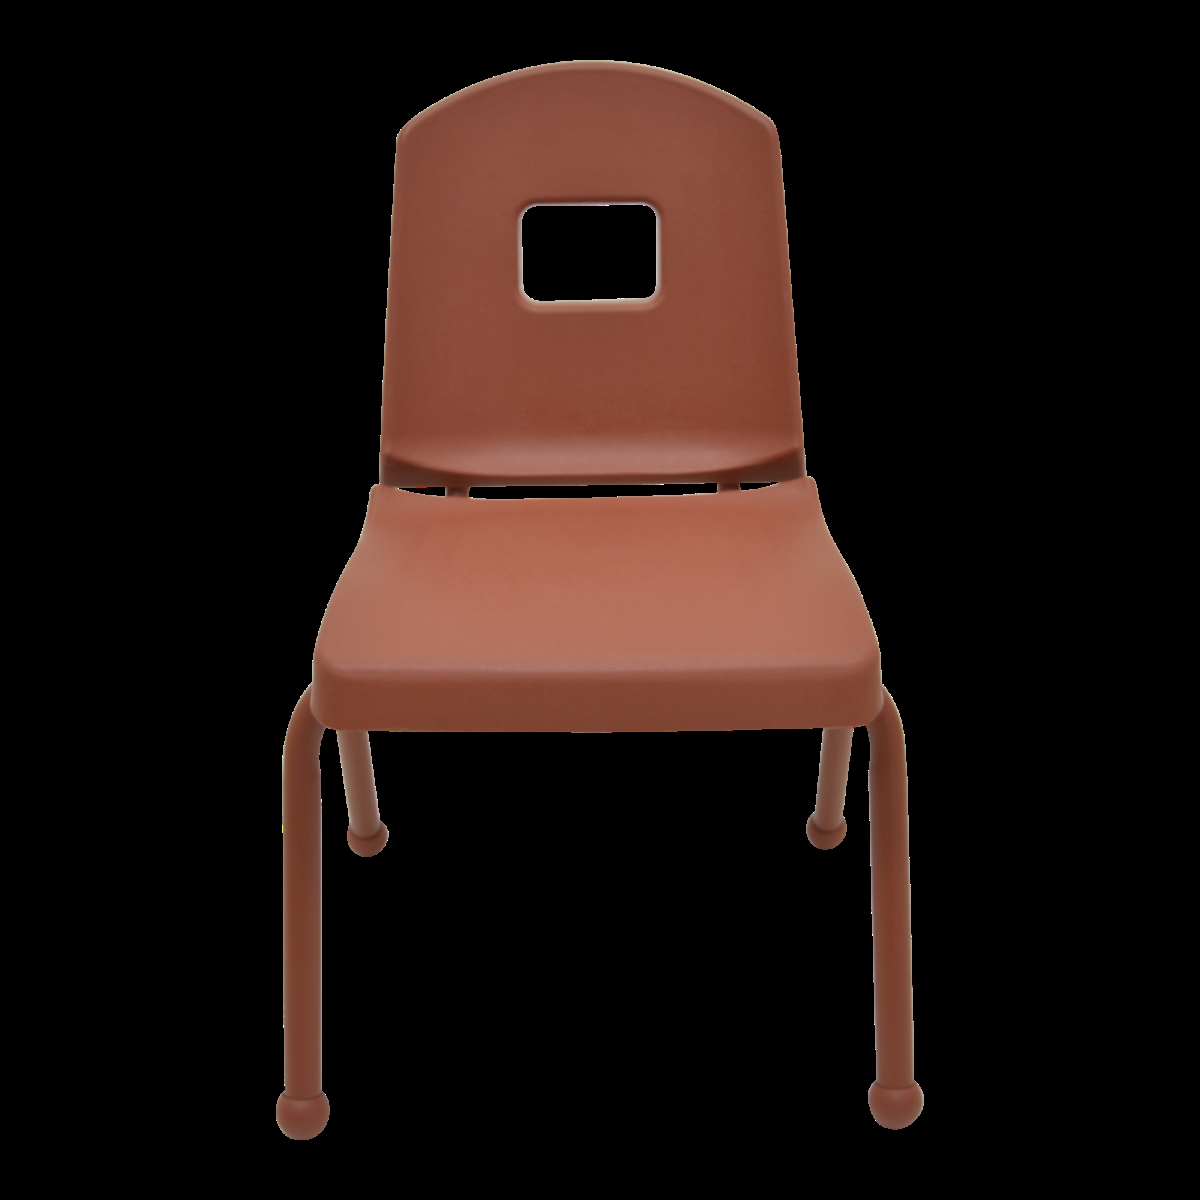 14chrb-rt-6pk 14 In. Creative Color Split Bucket Chair With Matching Ball Glide In Rust - Pack Of 6